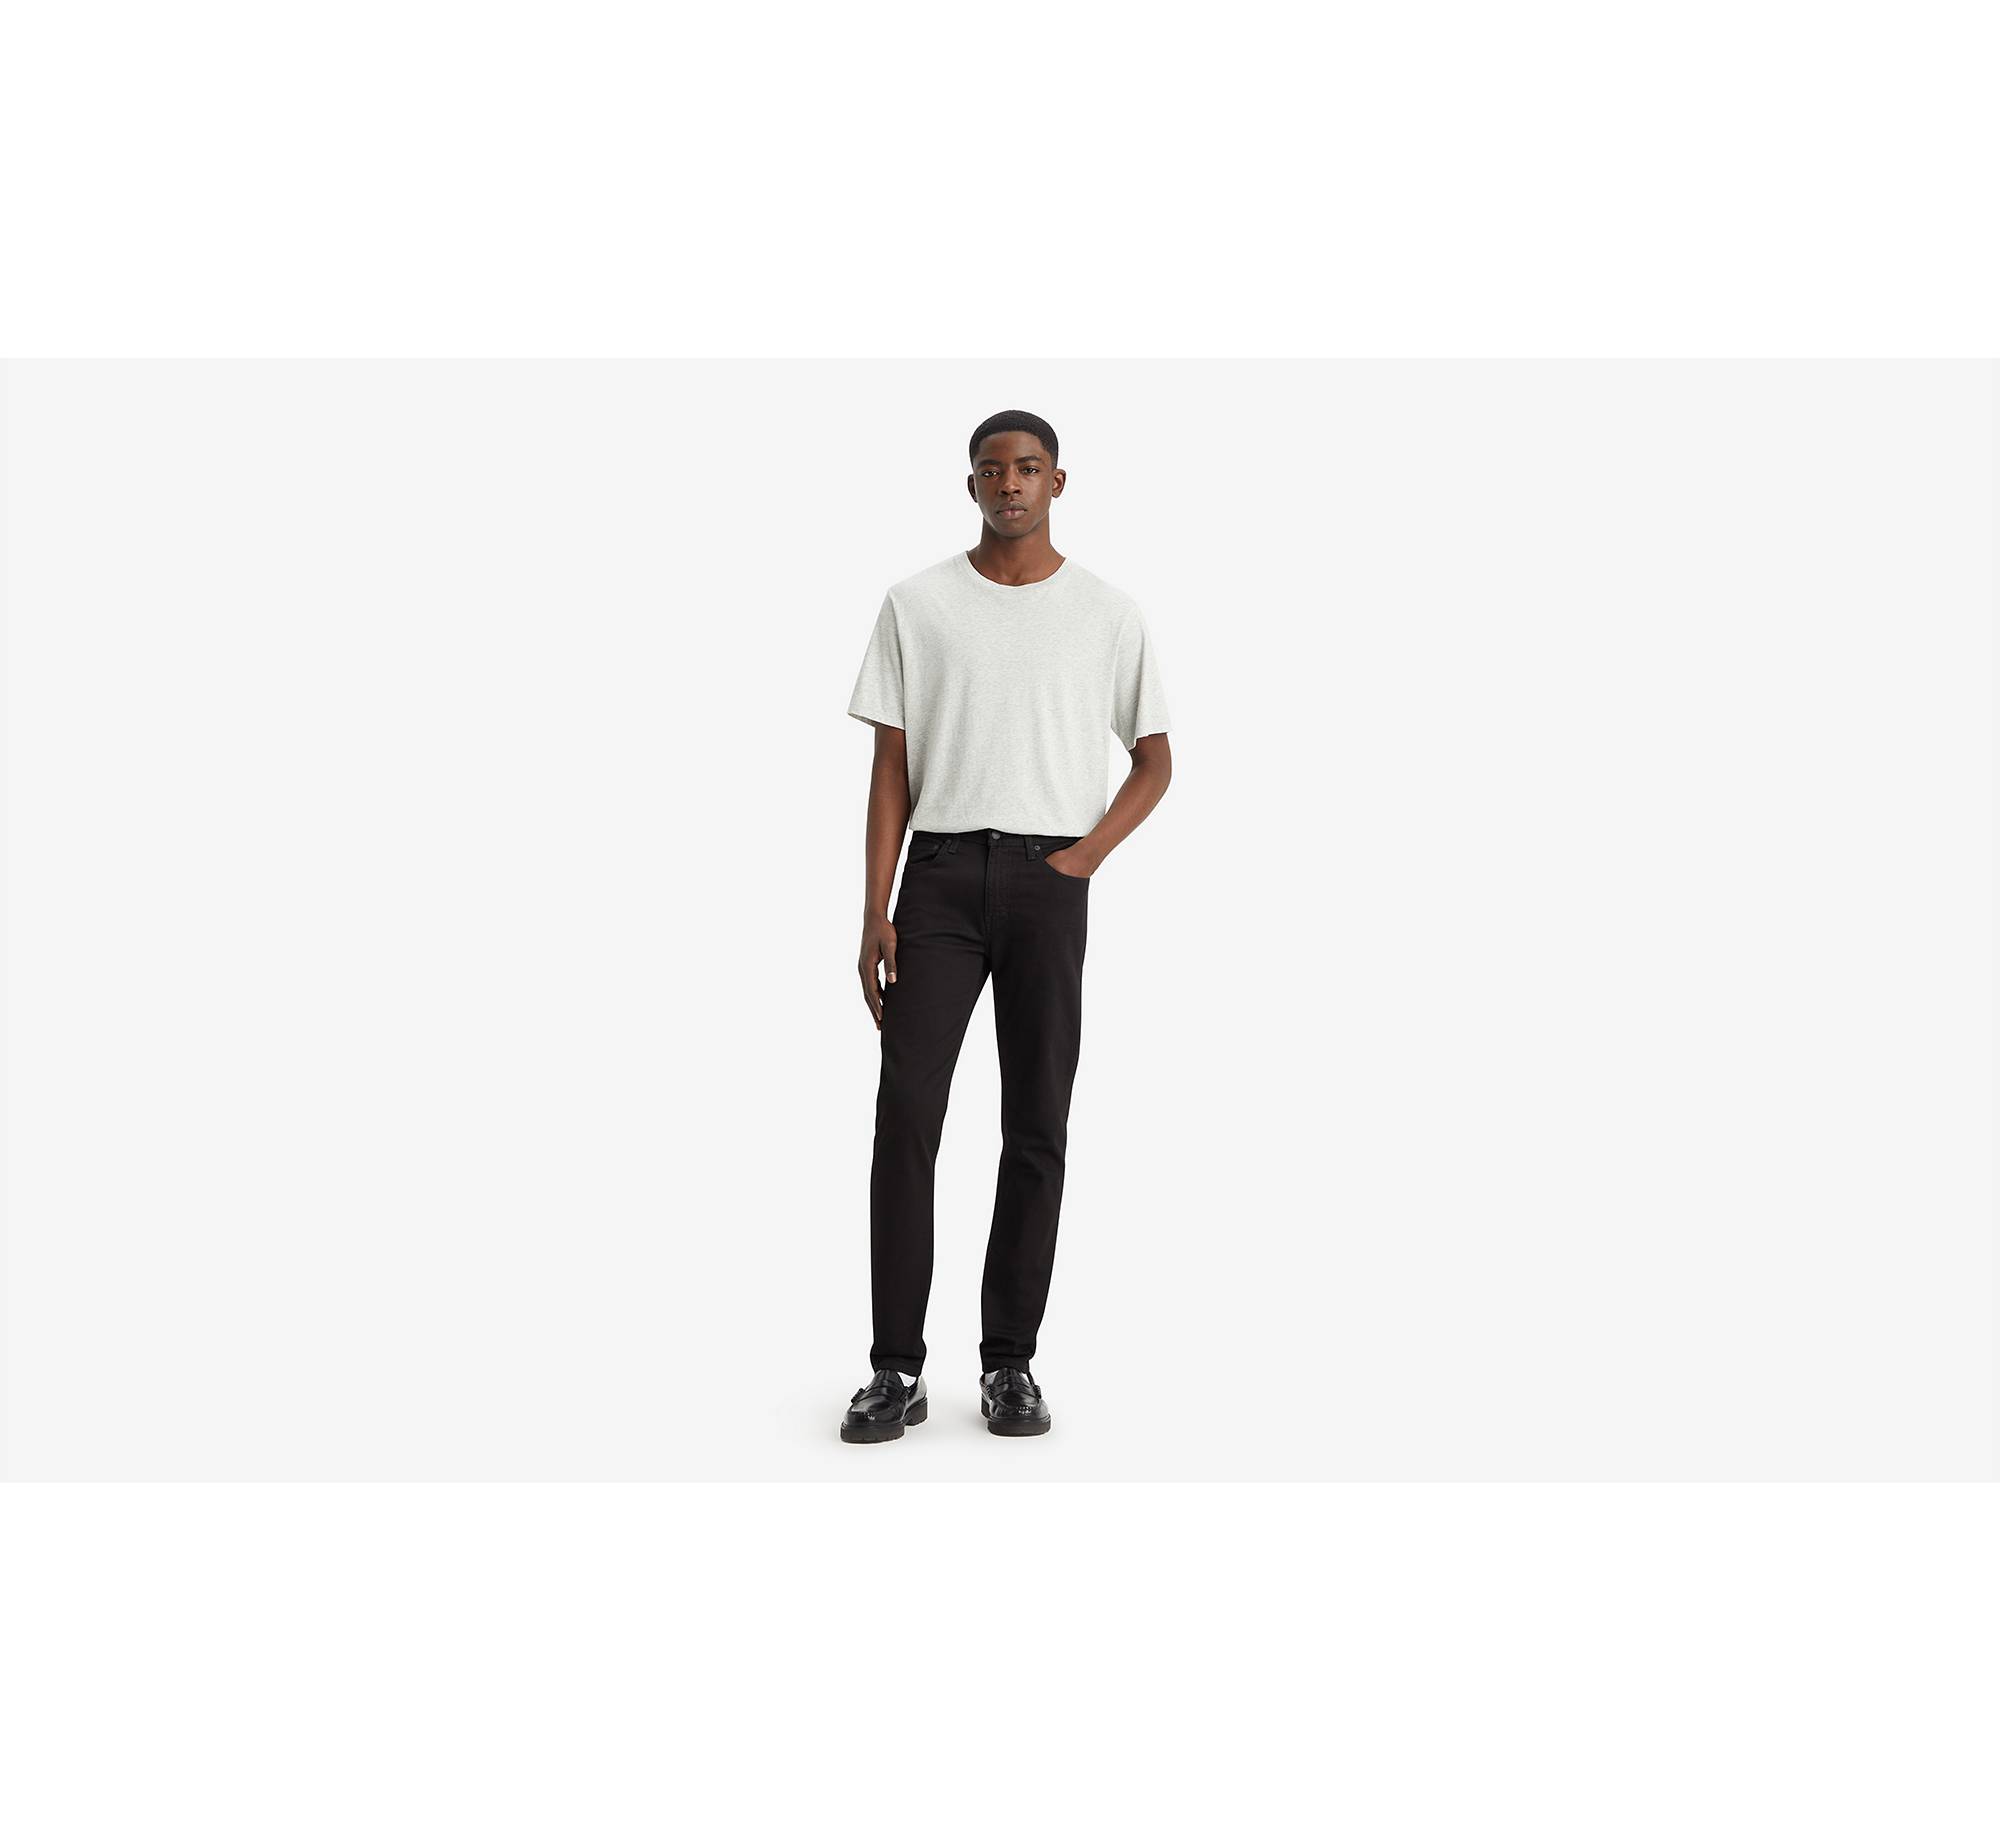 512™ Slim Tapered Lo-Ball Jeans 1